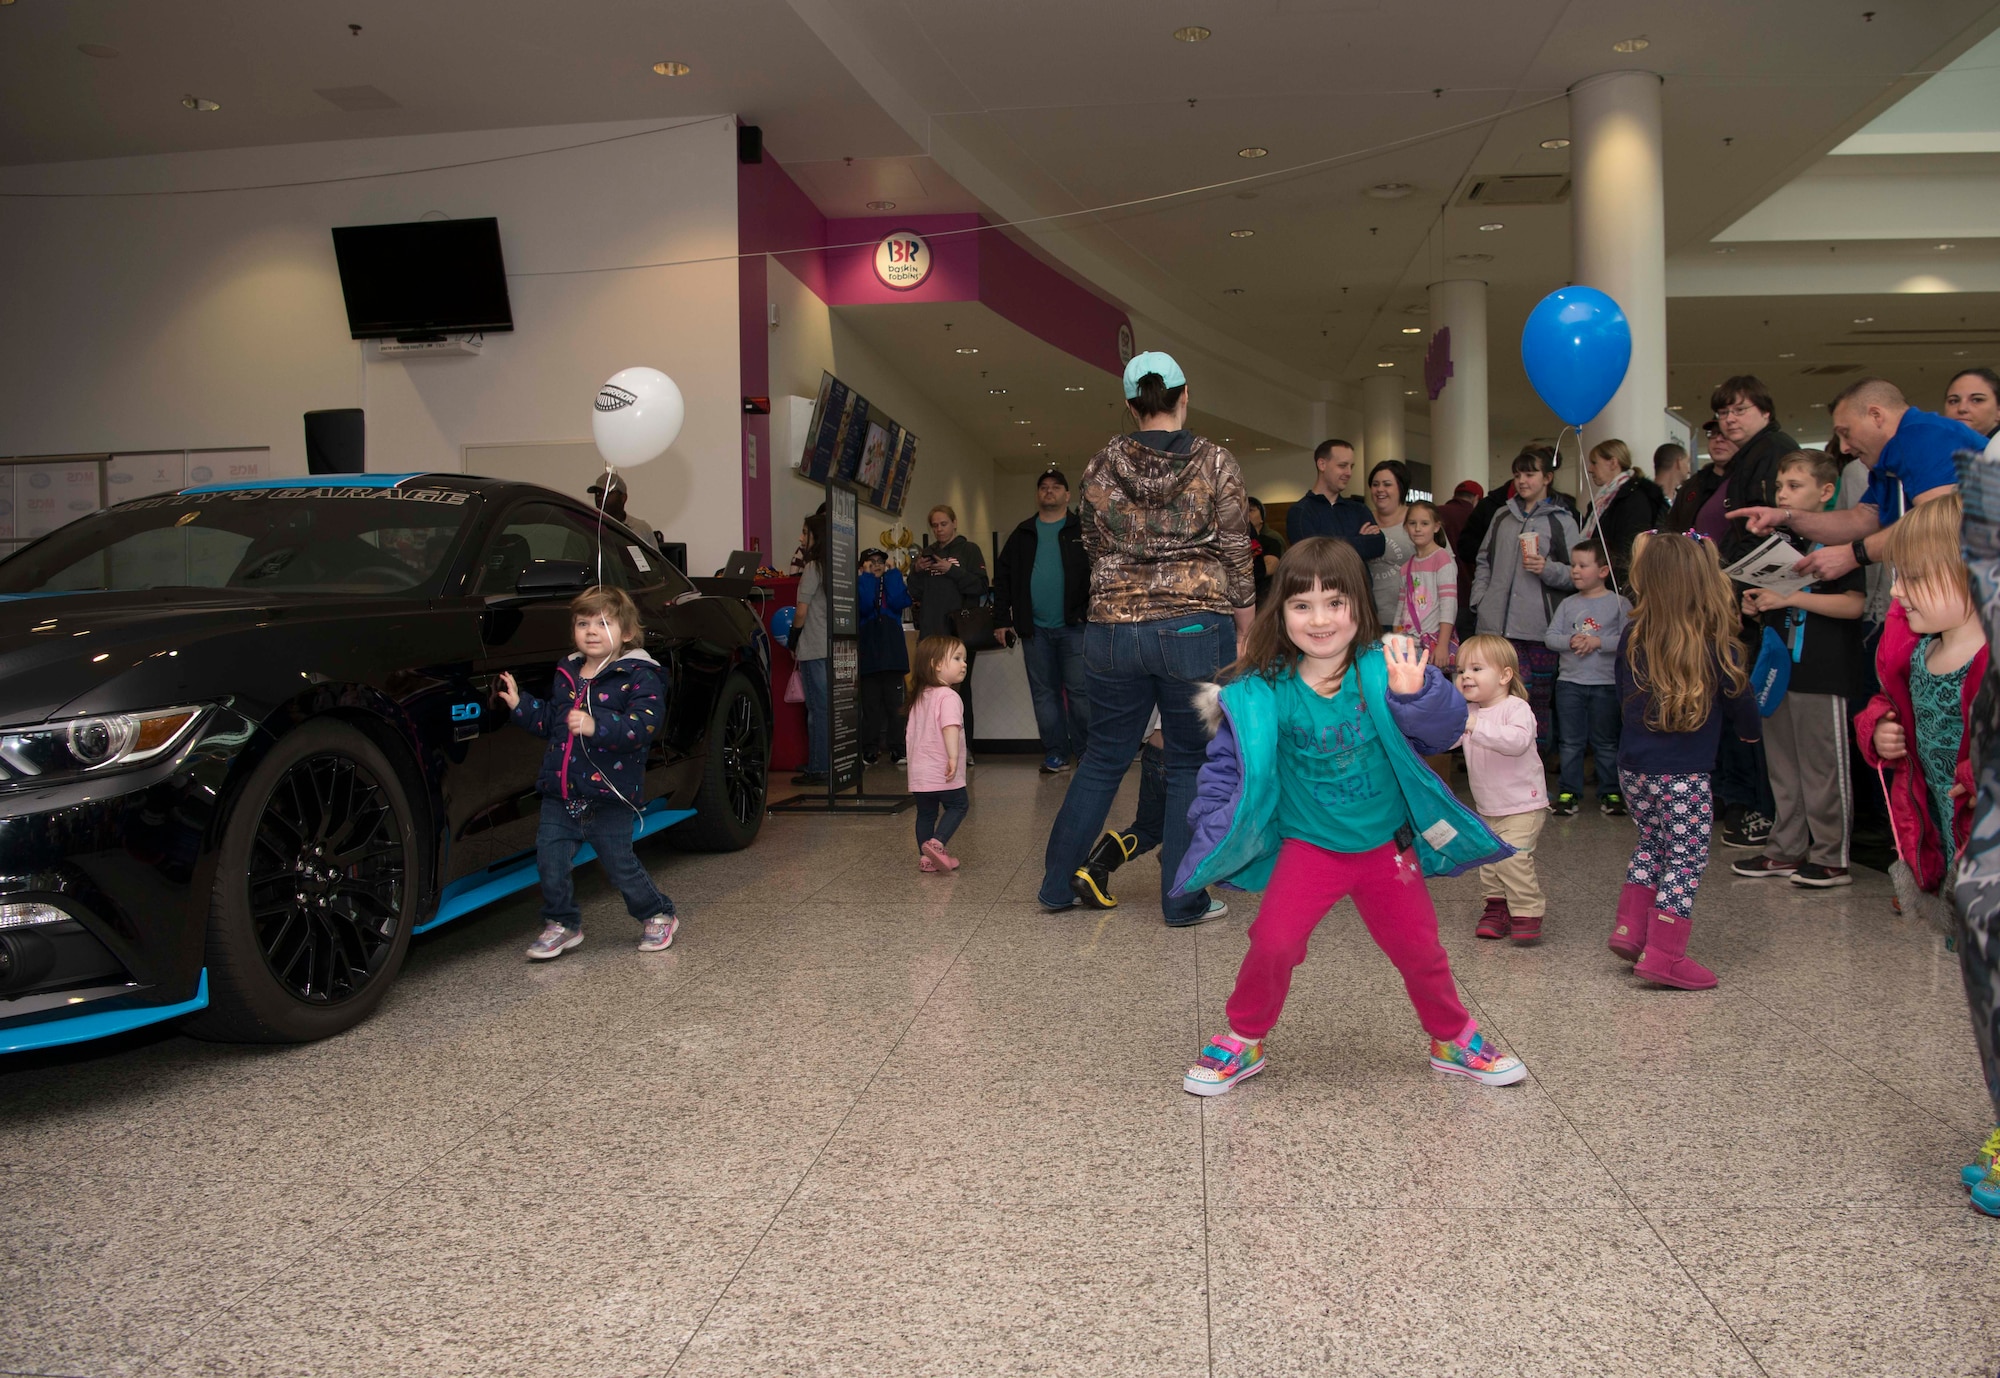 Children dance while waiting to see Richard Petty, Nascar legend, at a Kaiserslautern Military Community Center event on Ramstein Air Base, Germany, Jan. 27, 2018. Petty spoke with members of Team Ramstein, signed autographs, and participated in a question and answer session. (U.S. Air Force photo by Senior Airman Elizabeth Baker)